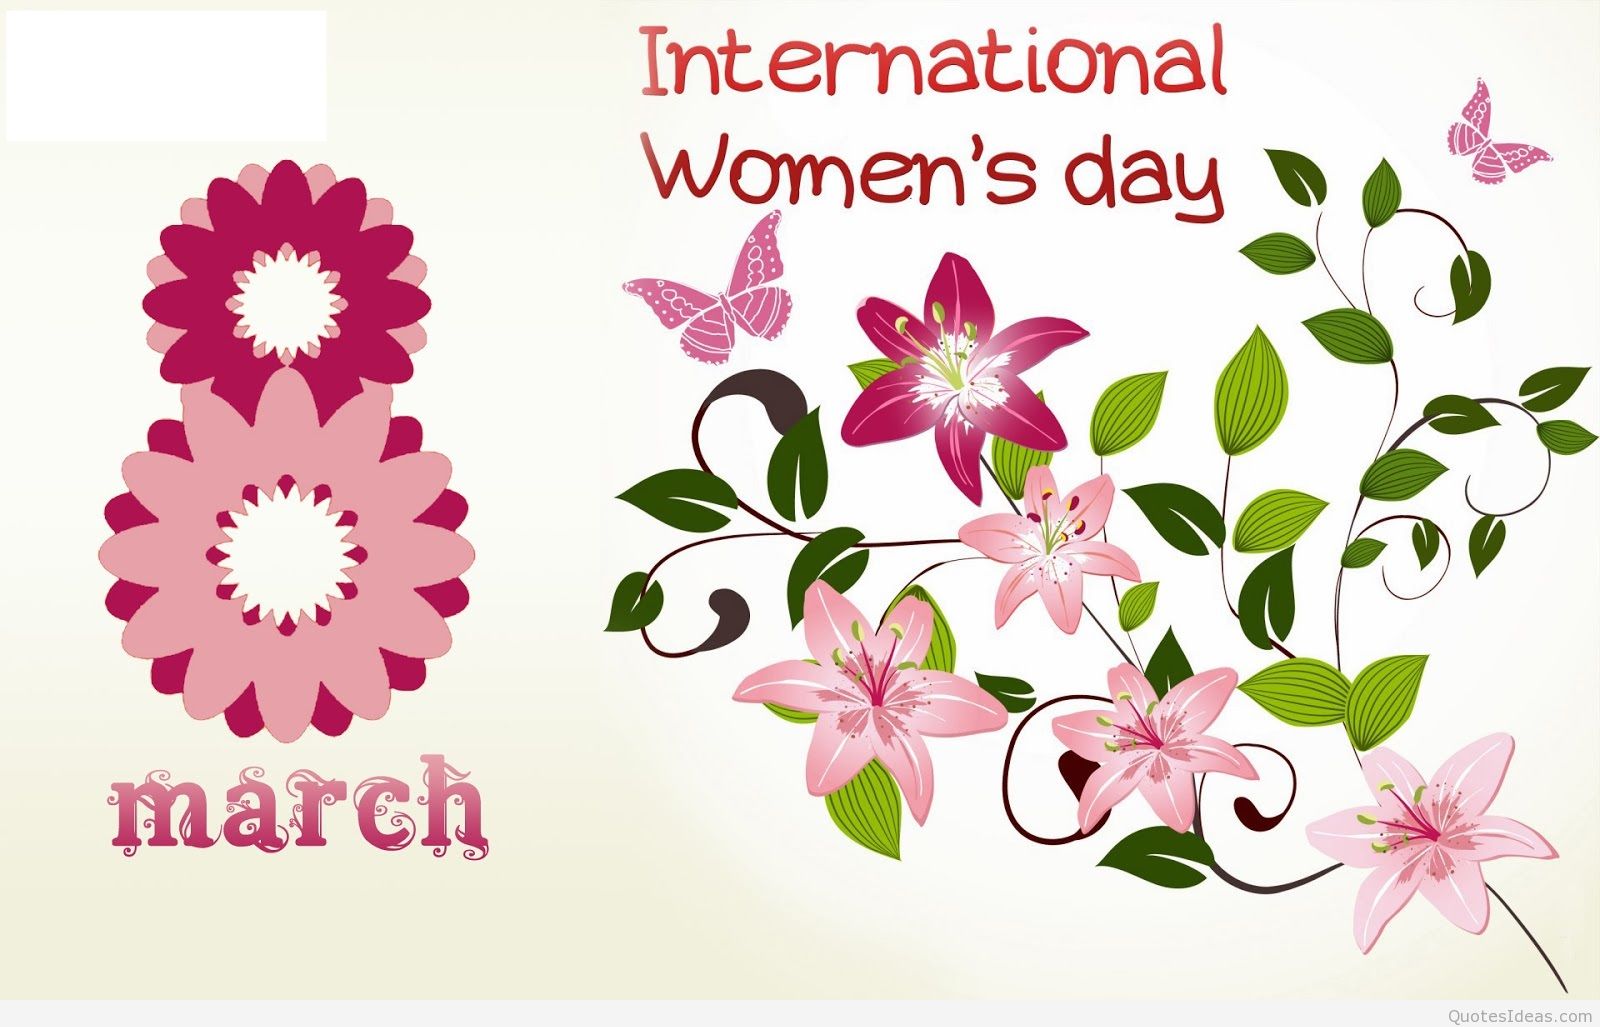 Happy International Women's Day from McGeough Financial!